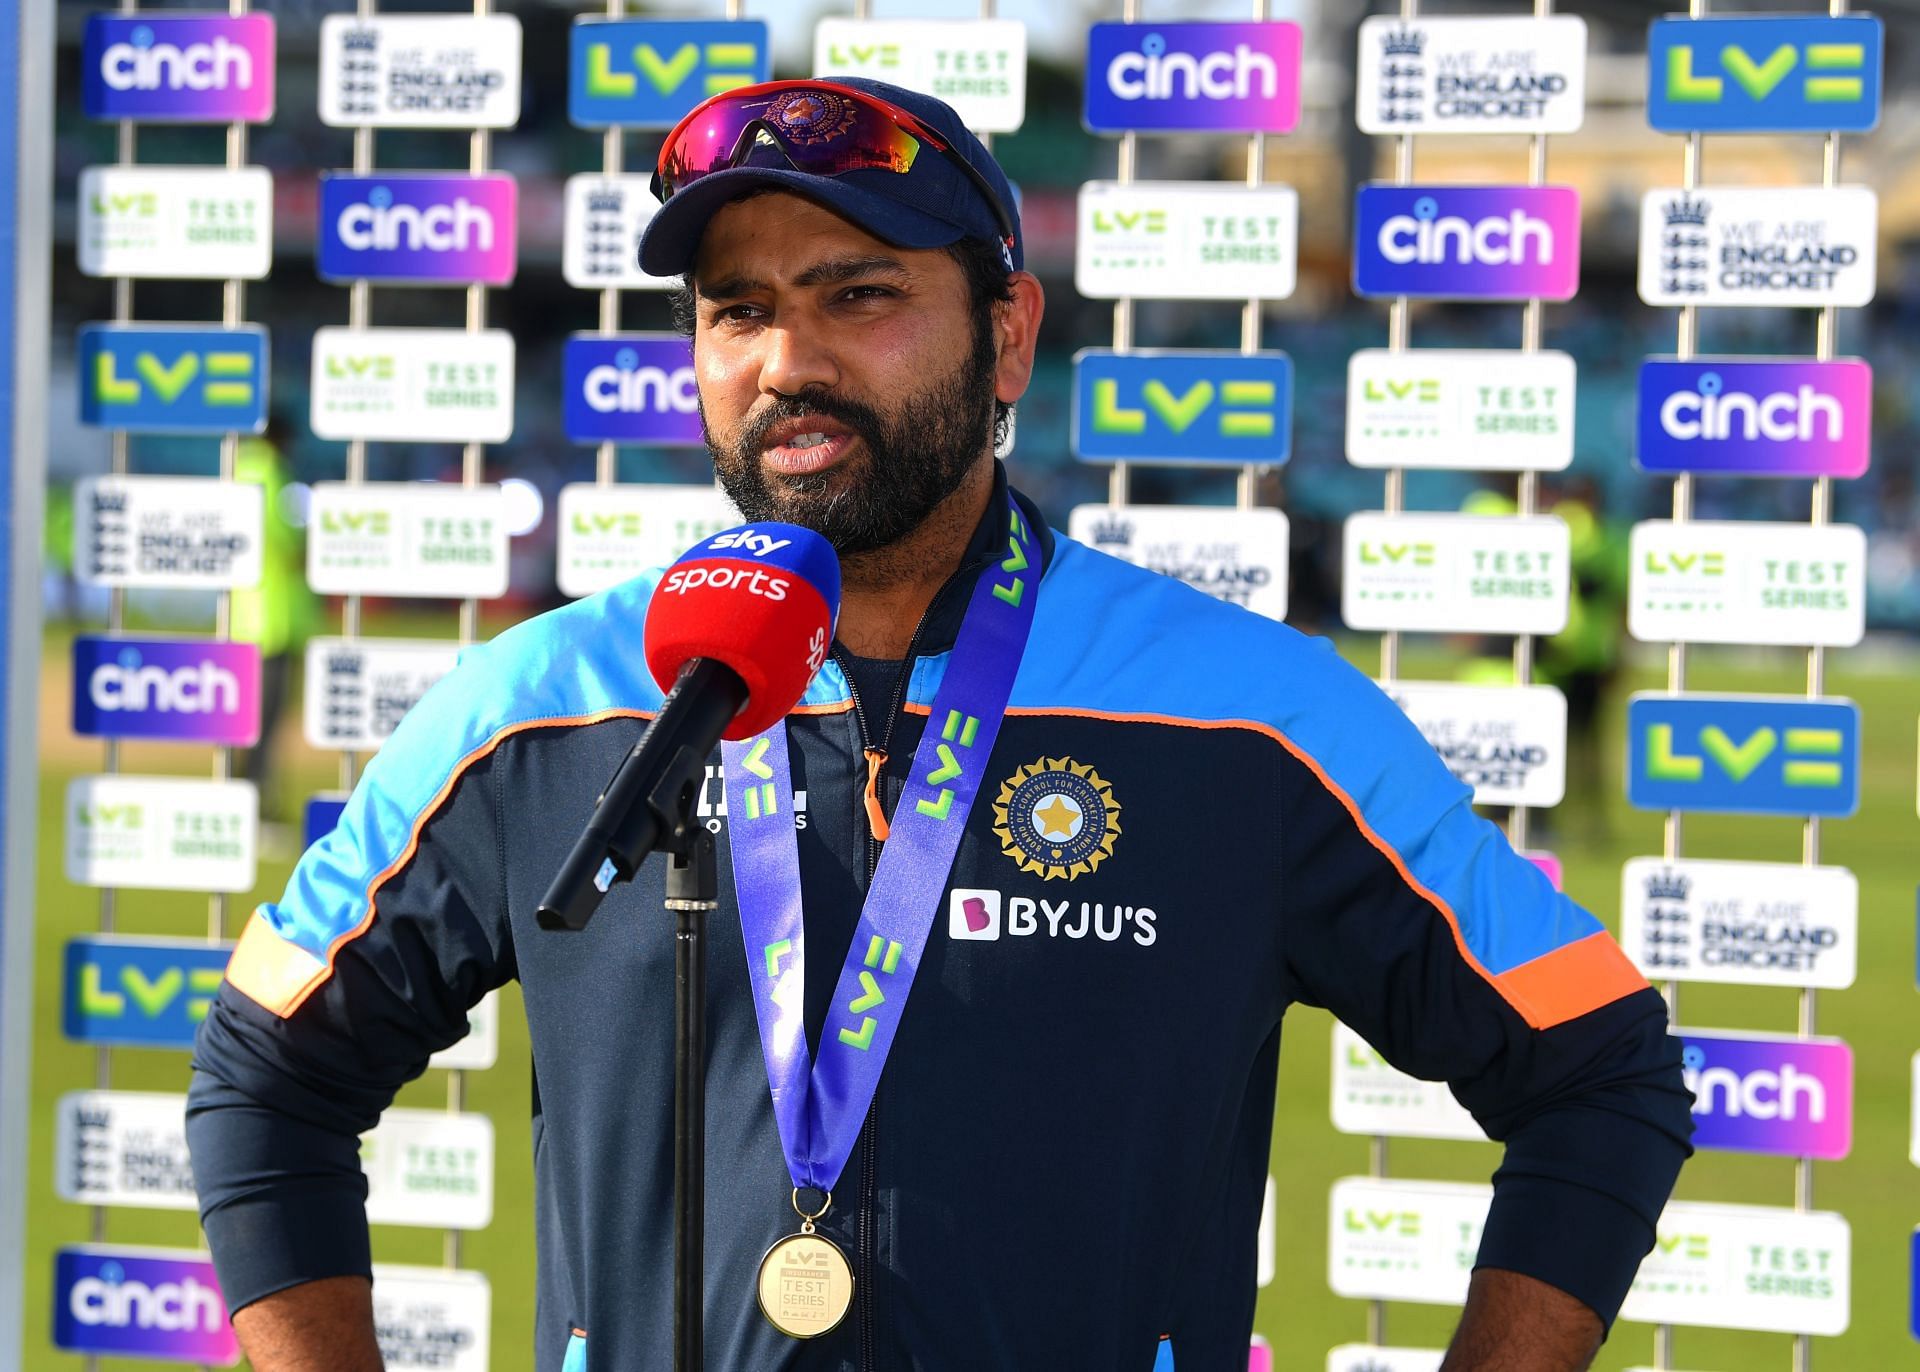 “It will not be easy for Rohit Sharma” – Irfan Pathan on him taking over as Test captain from Virat Kohli